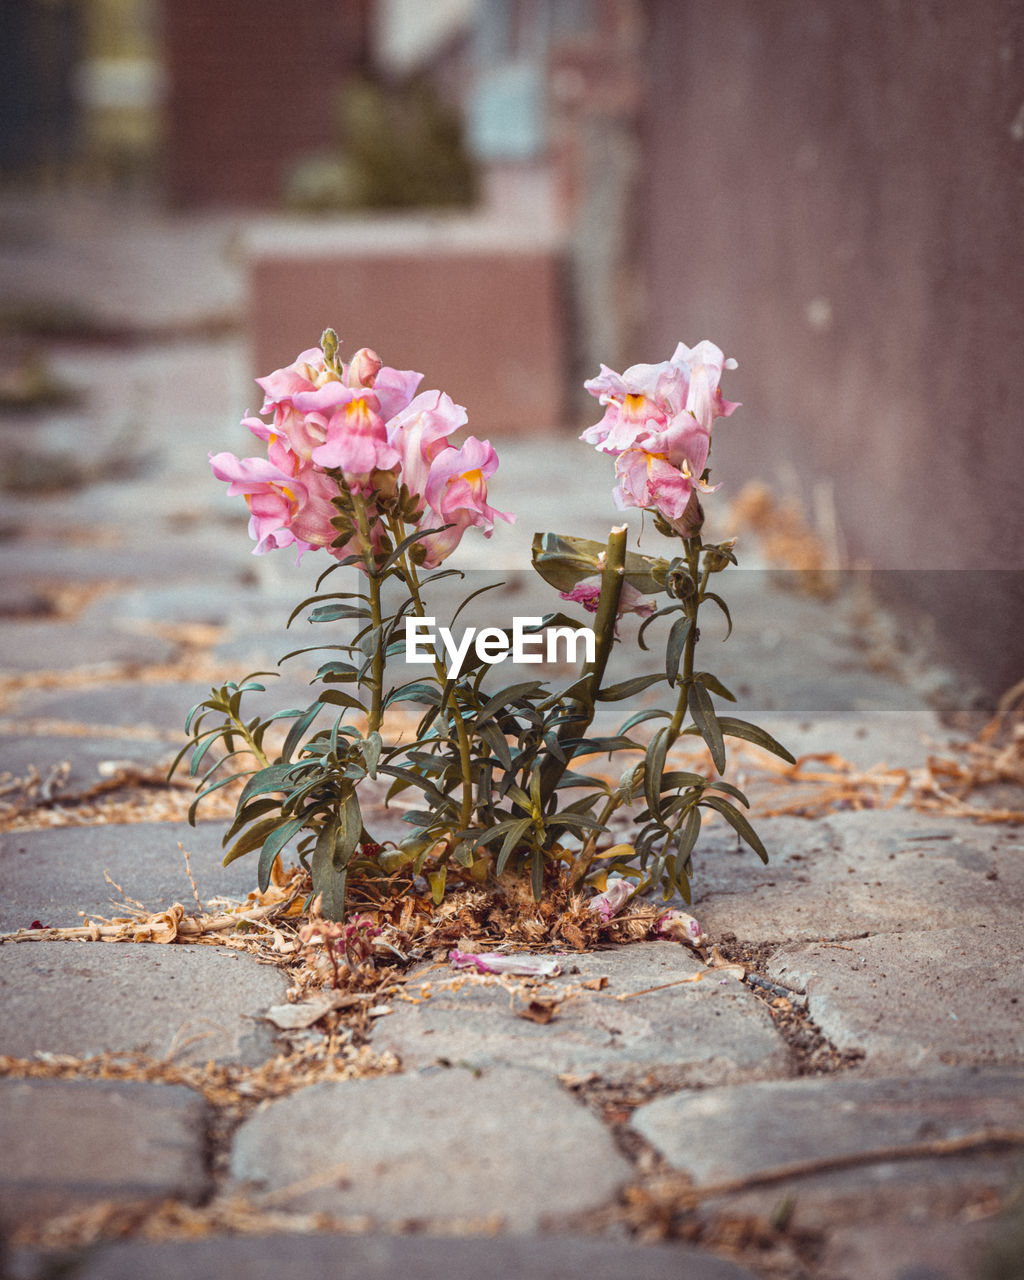 flower, flowering plant, plant, nature, spring, beauty in nature, pink, freshness, no people, leaf, fragility, city, selective focus, street, outdoors, close-up, day, autumn, blossom, architecture, footpath, red, springtime